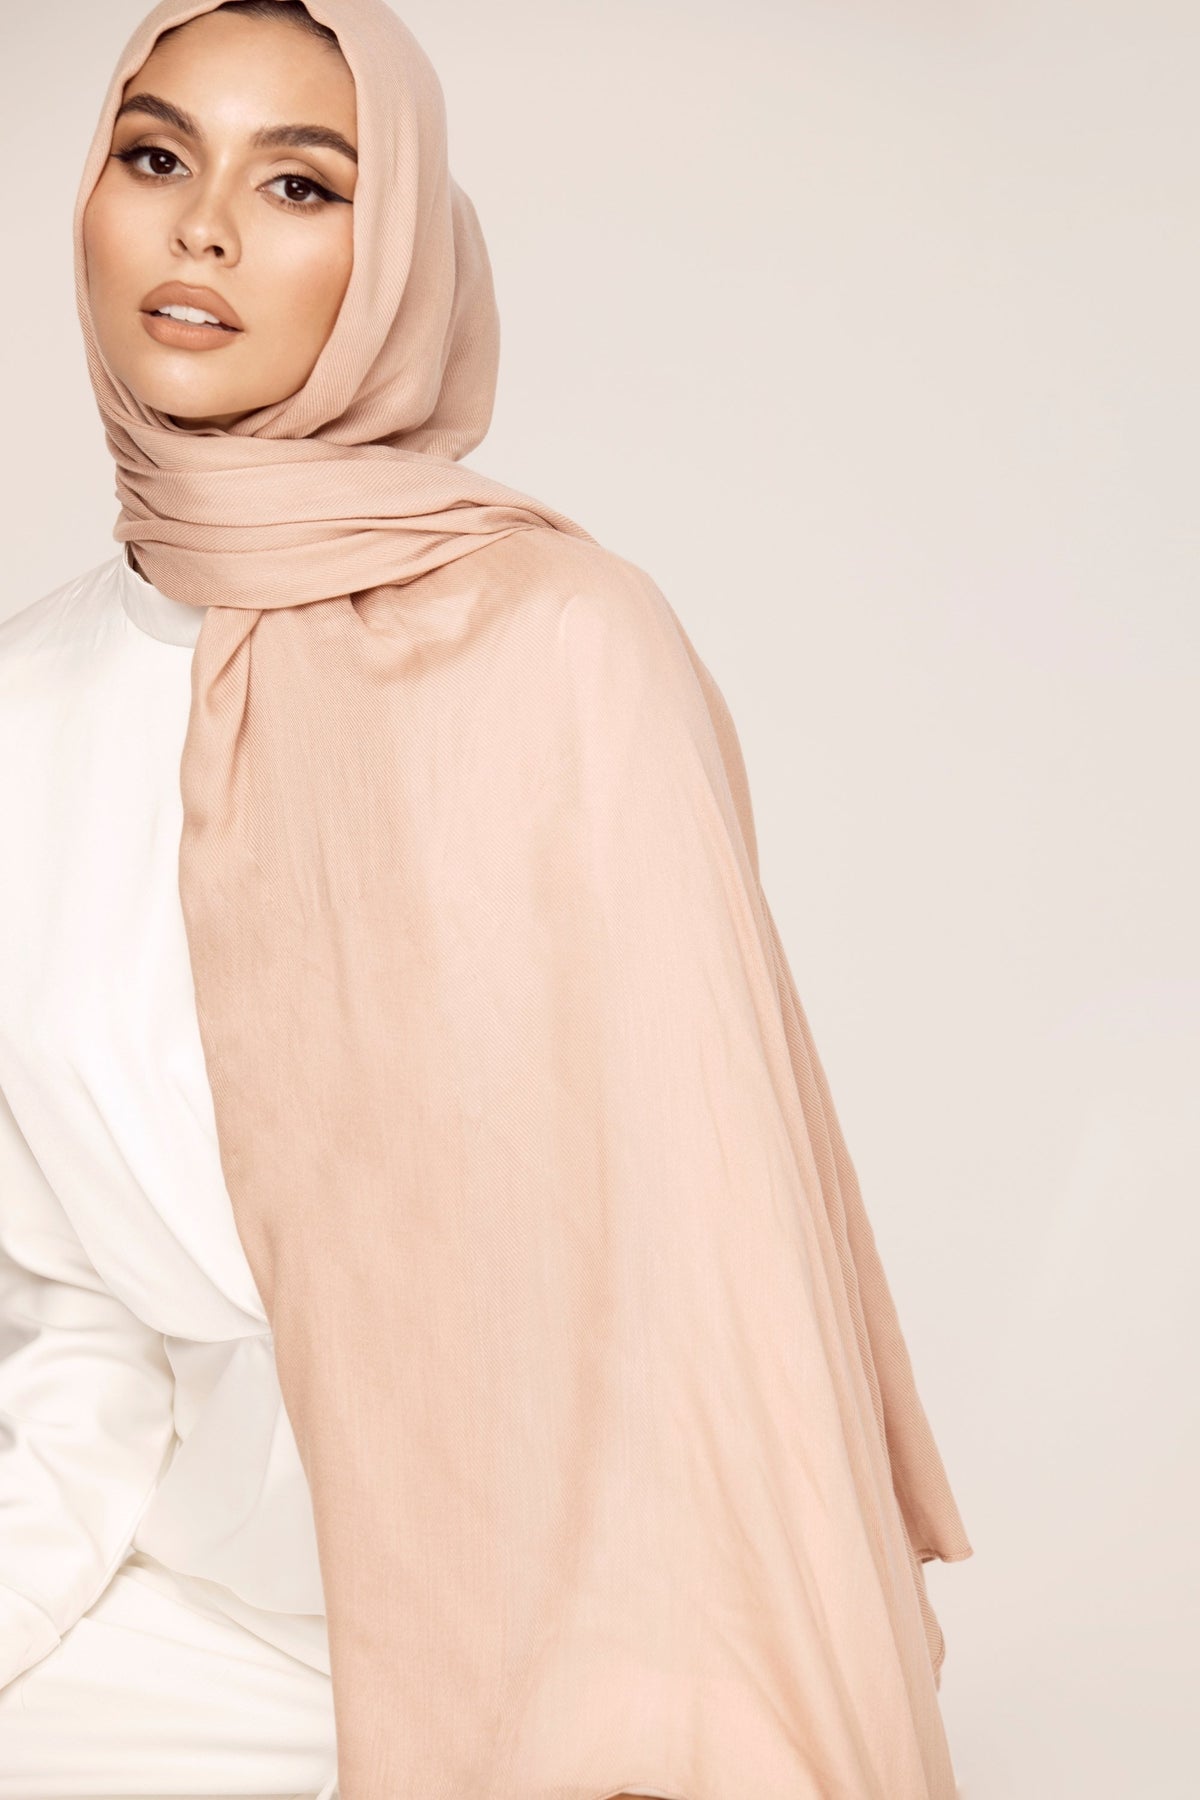 Premium Woven ECOVERO™ Hijab - Soft Brown Veiled Collection 